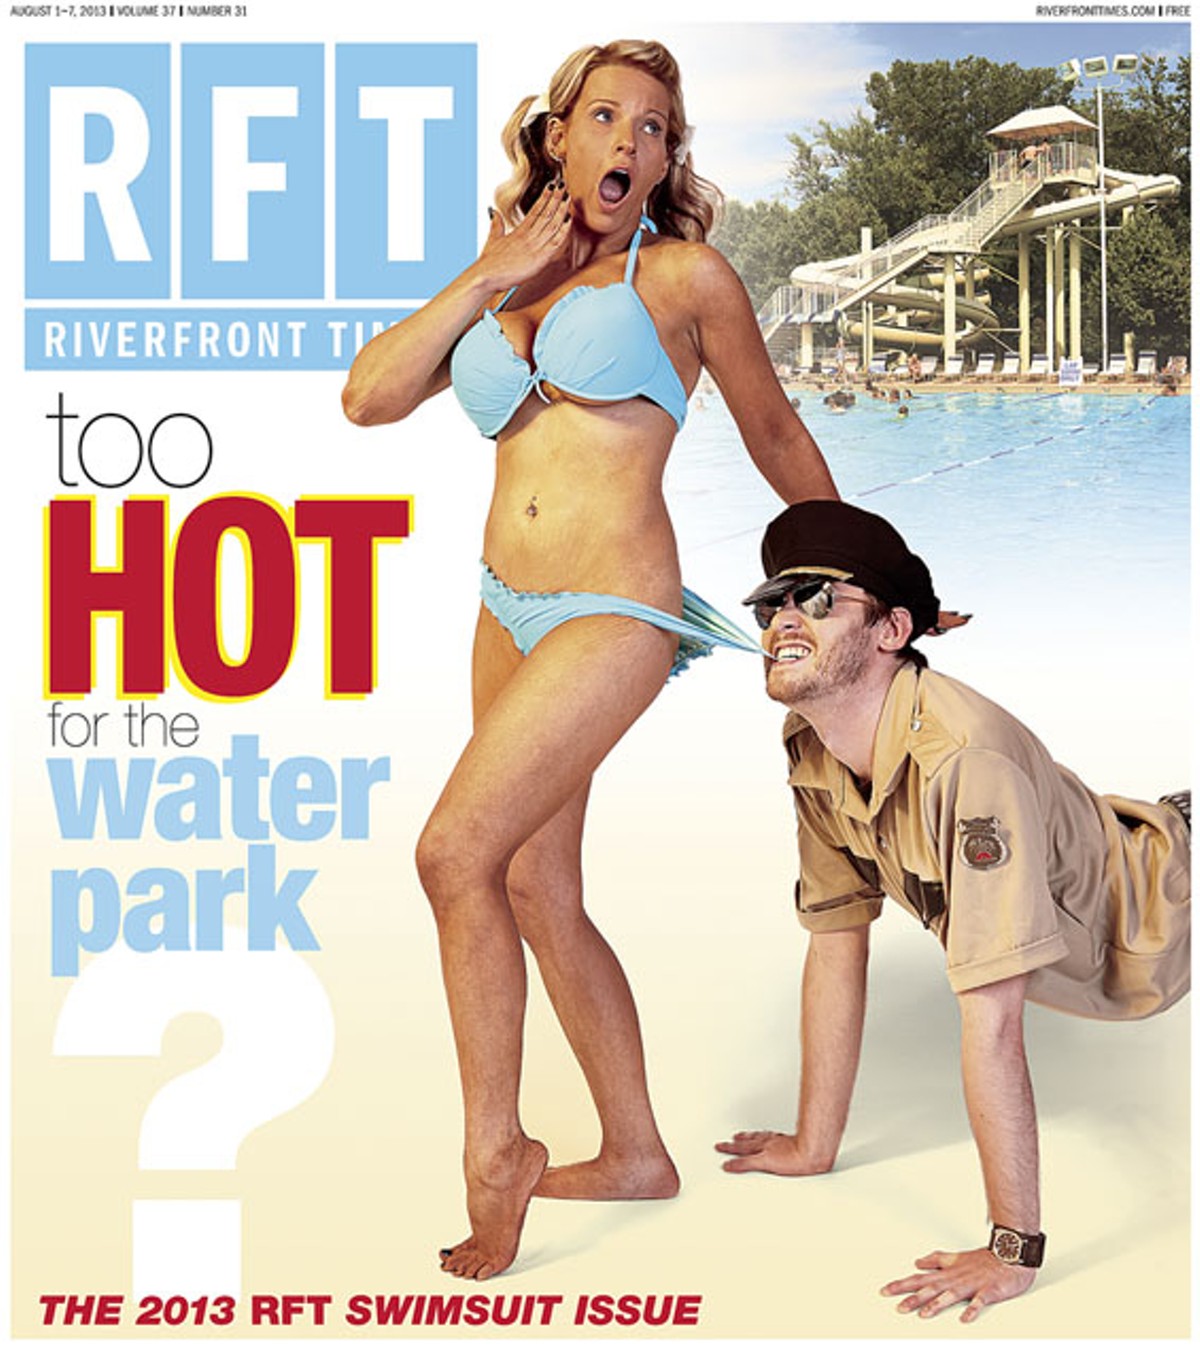 The Cover of the July 31 Print Edition